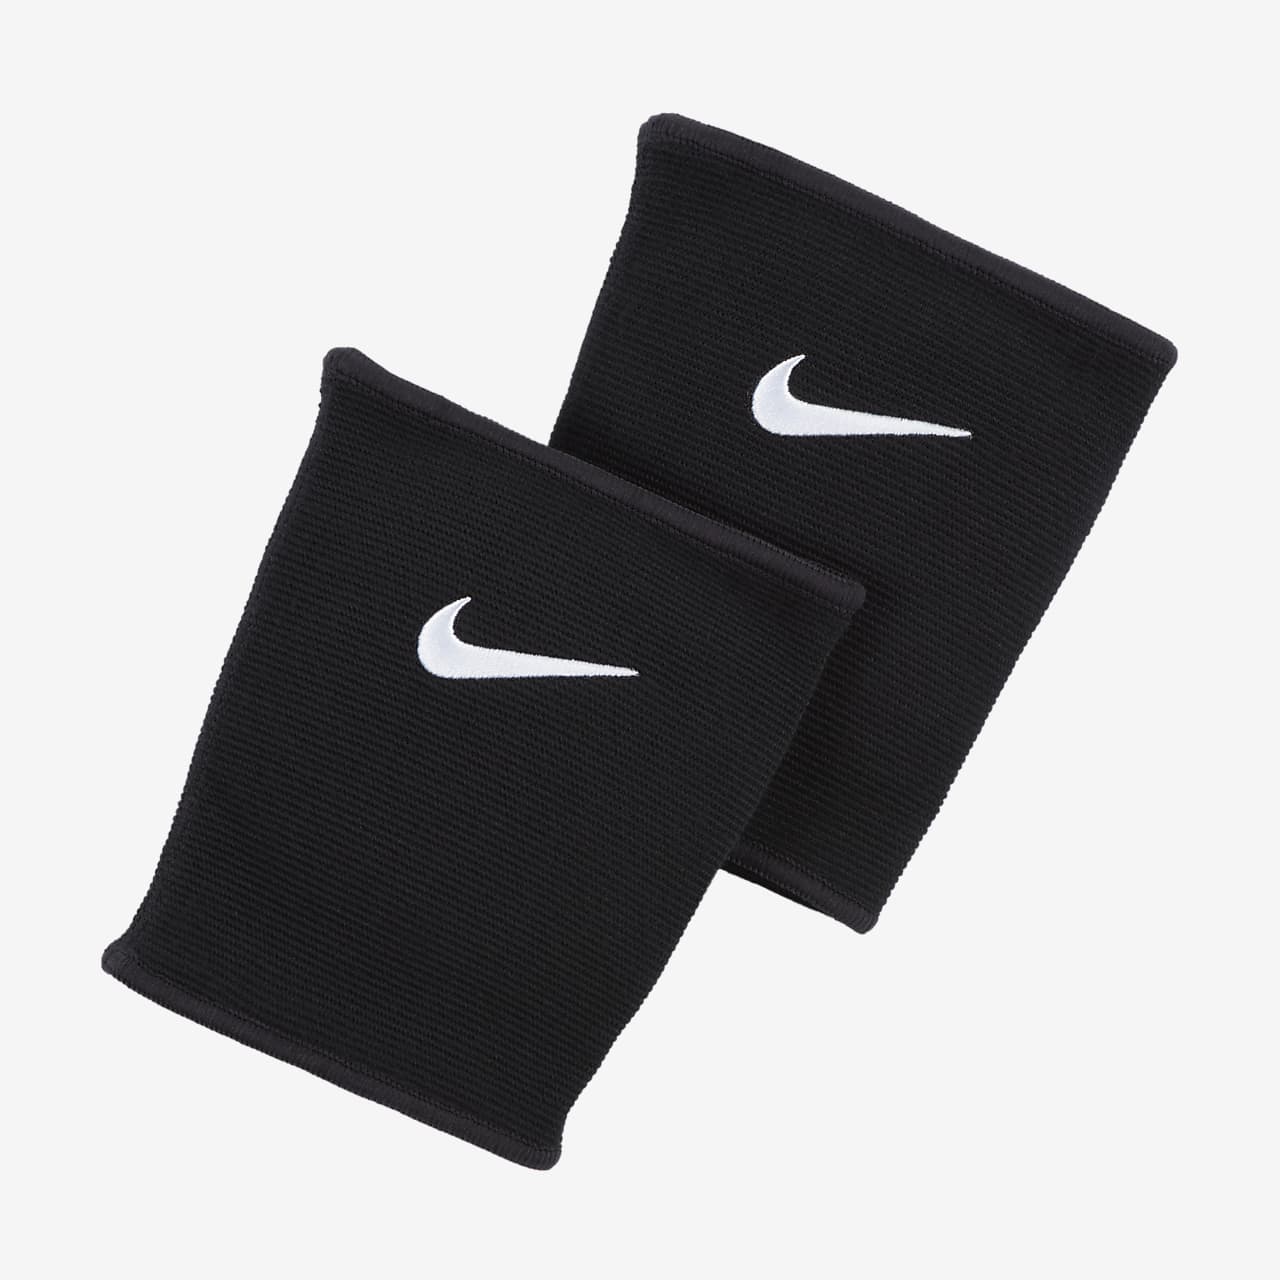 Genouillères de volleyball protectrices unisexe Nike Essential Dri